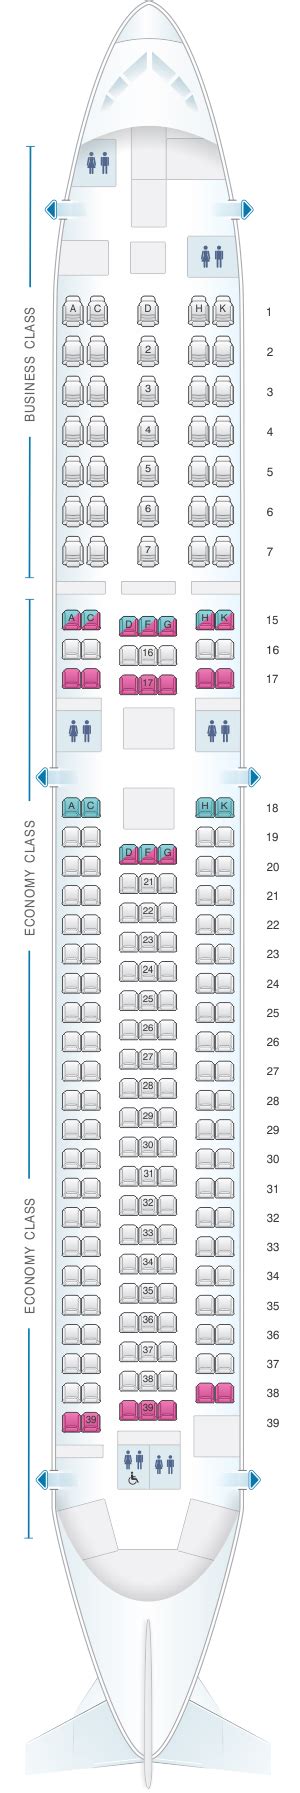 Ana All Nippon Airways Boeing Seat Map Updated Find Off